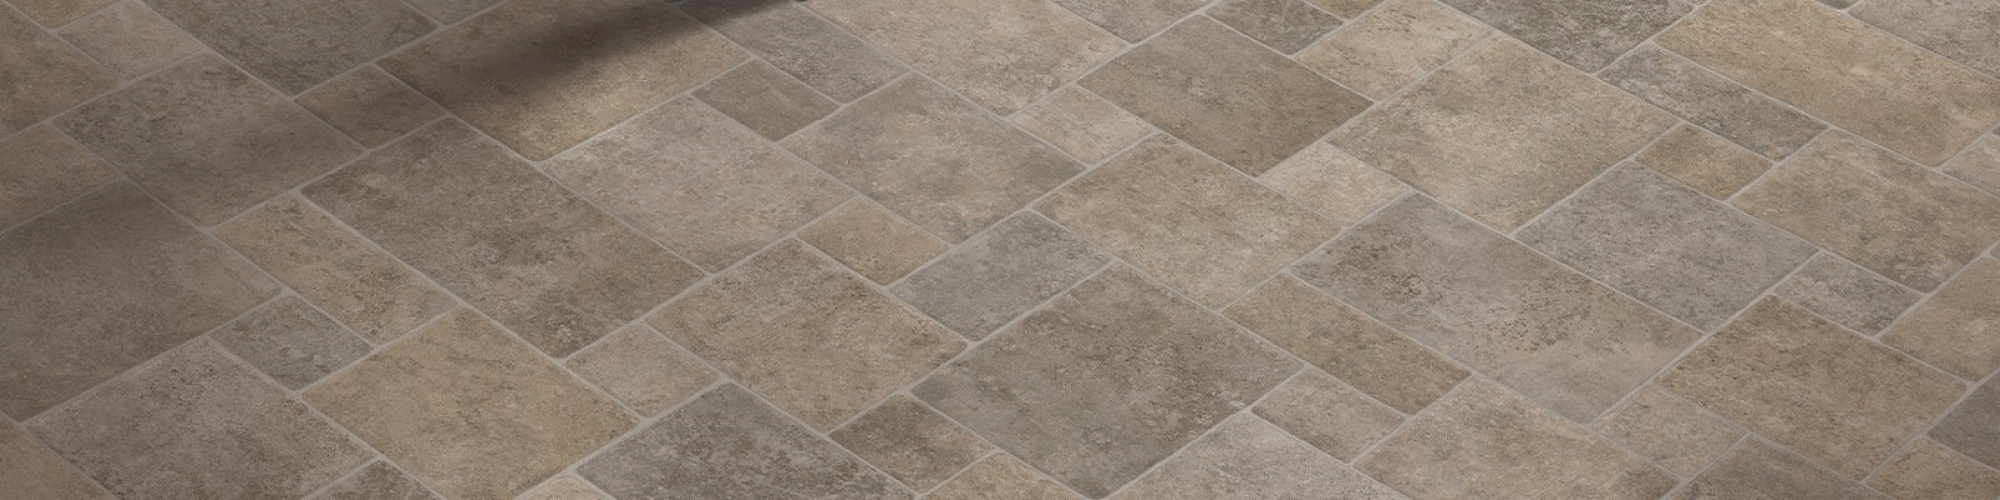 Choose Stoller Floors for your flooring needs!